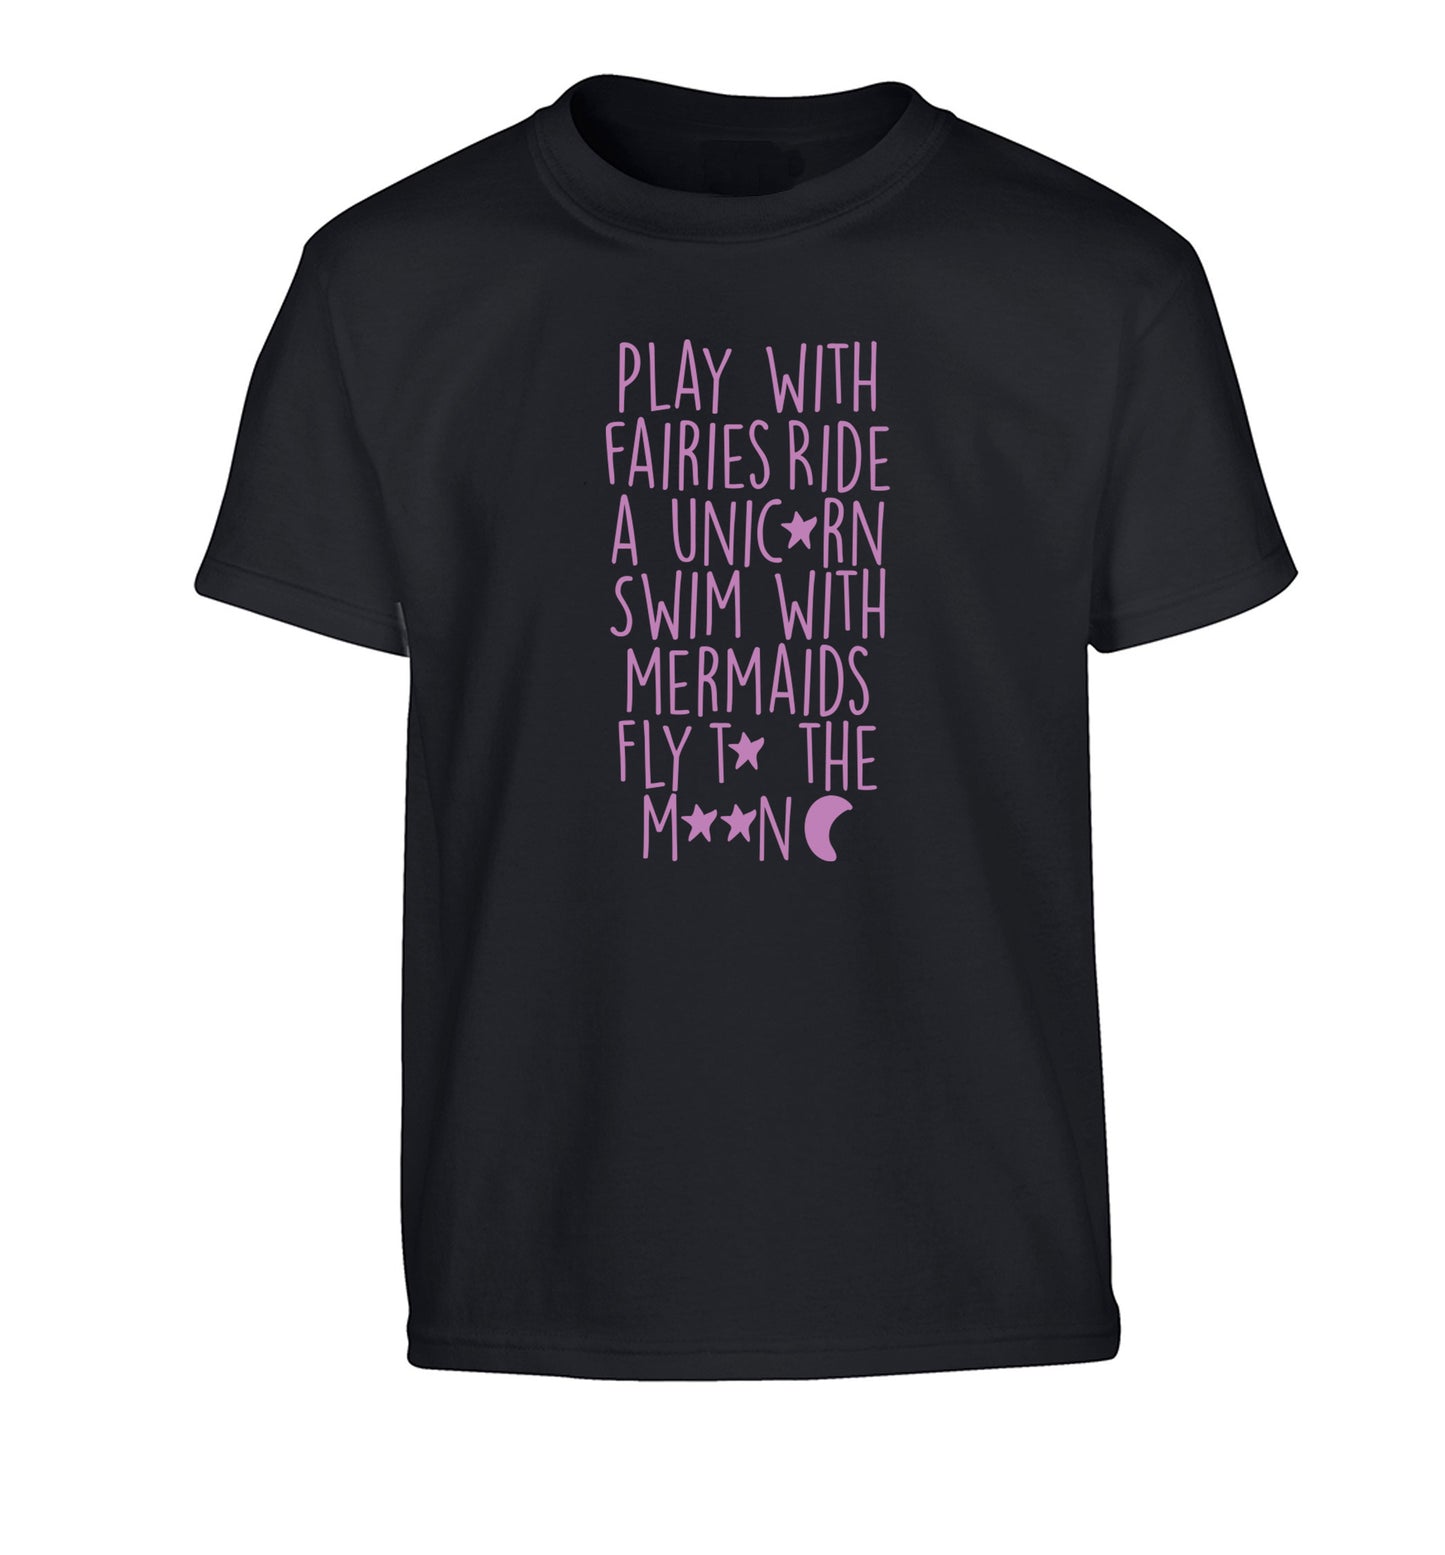 Play with fairies ride a unicorn swim with mermaids fly to the moon Children's black Tshirt 12-14 Years